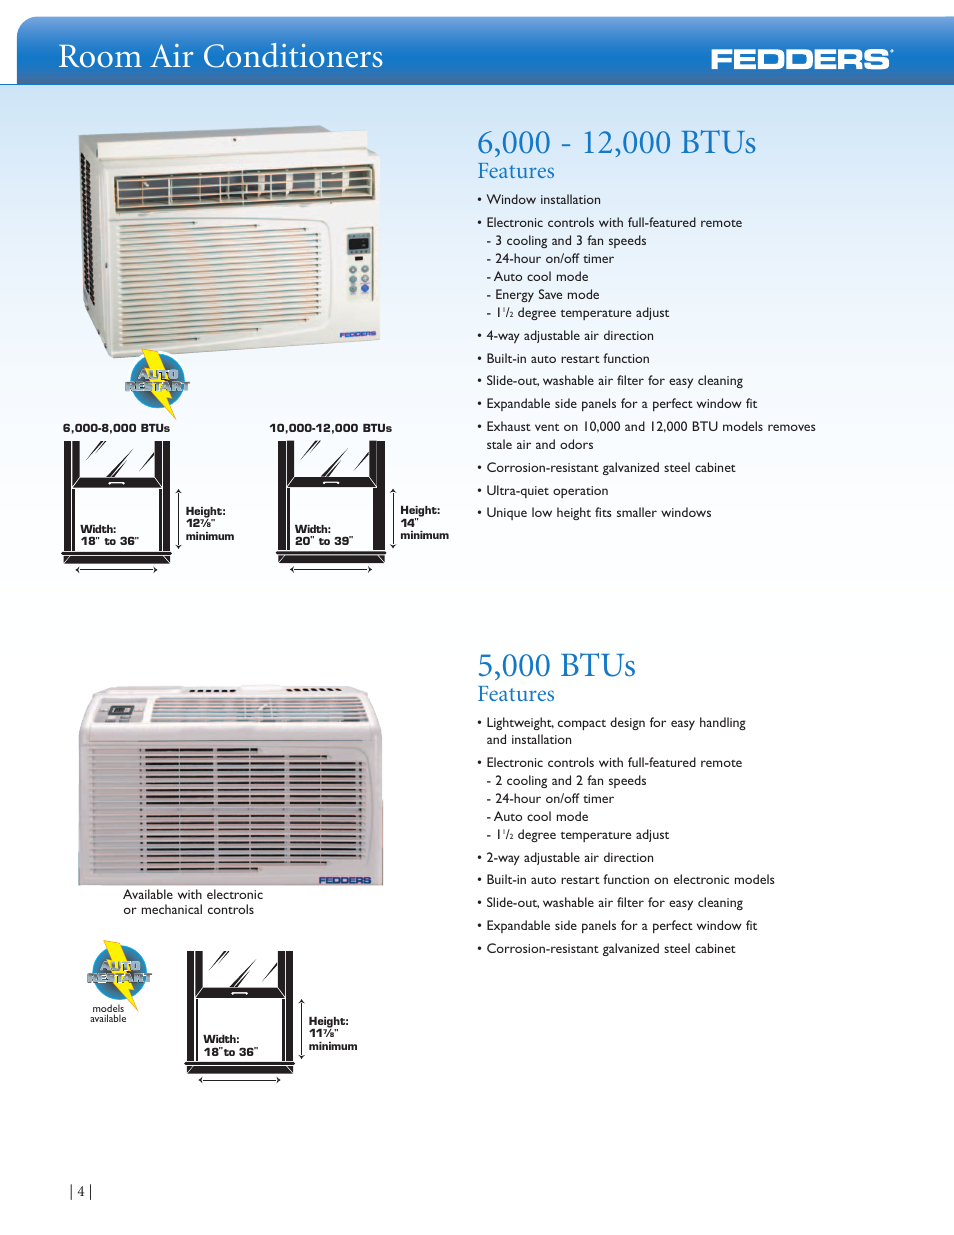 Room air conditioners, 5,000 btus, Features Fedders Room Air Conditioners User Manual Page 4